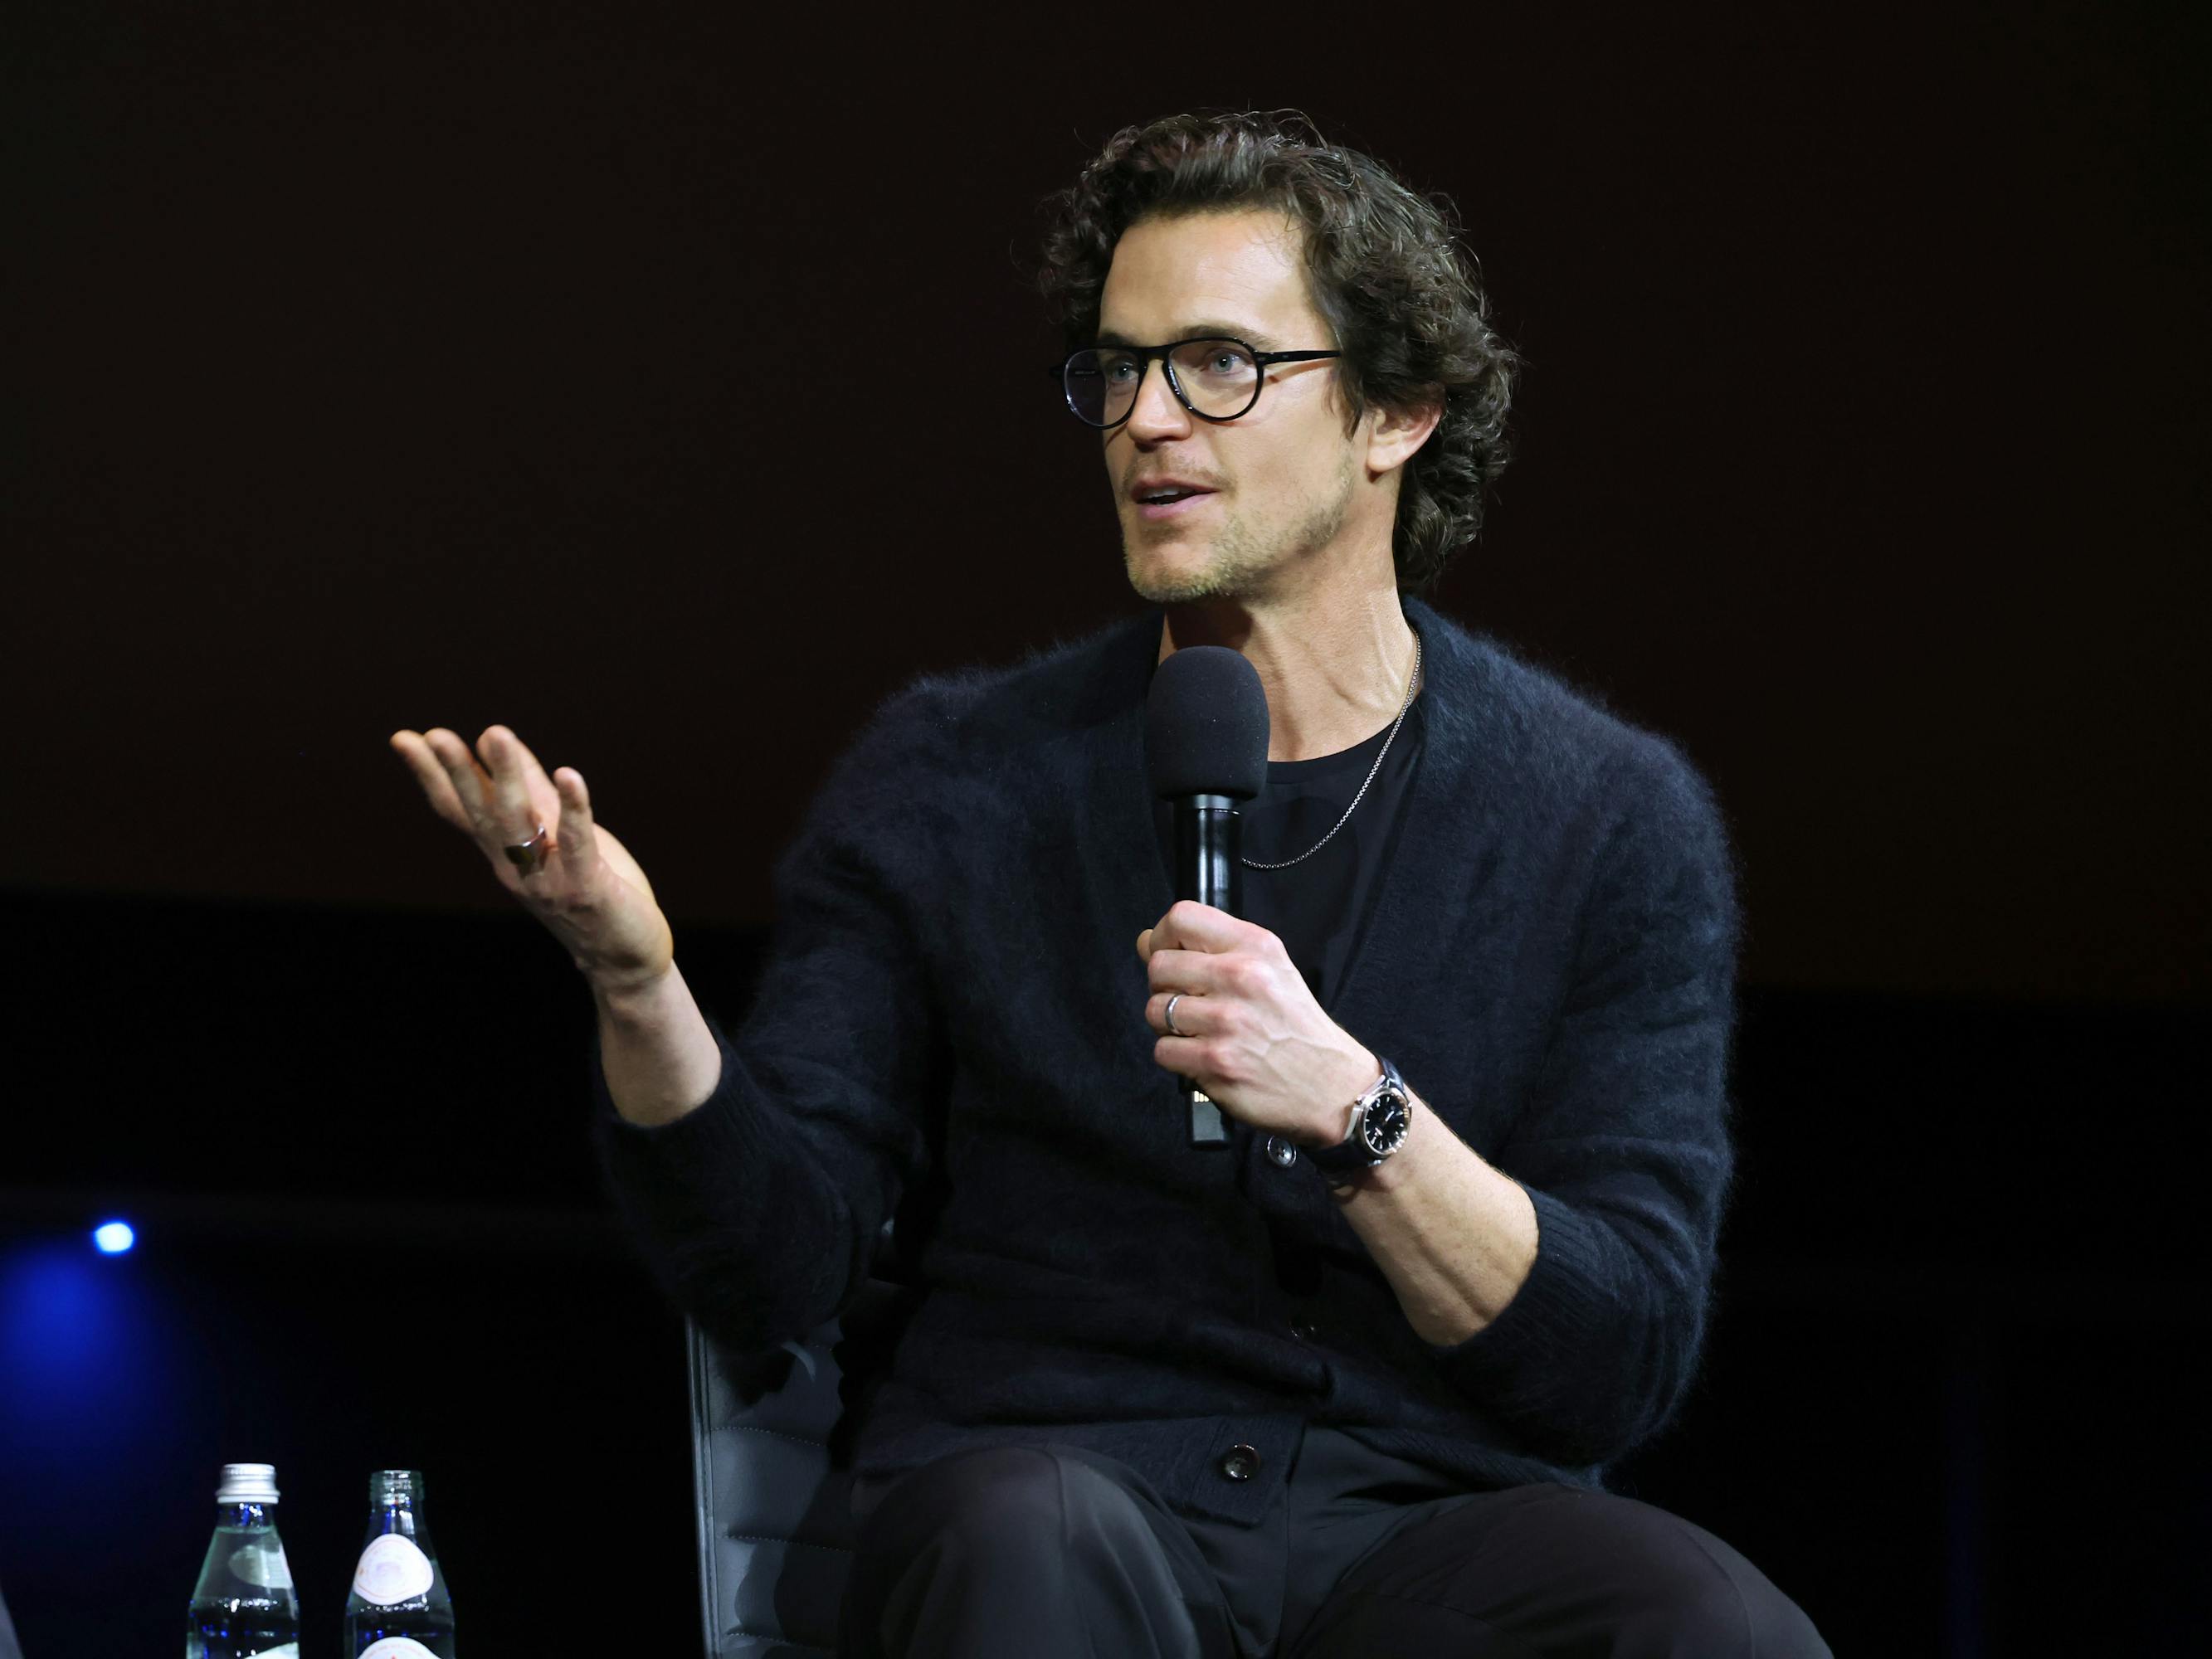 Matt Bomer wears a navy sweater and dark glasses and gestures with his hand.